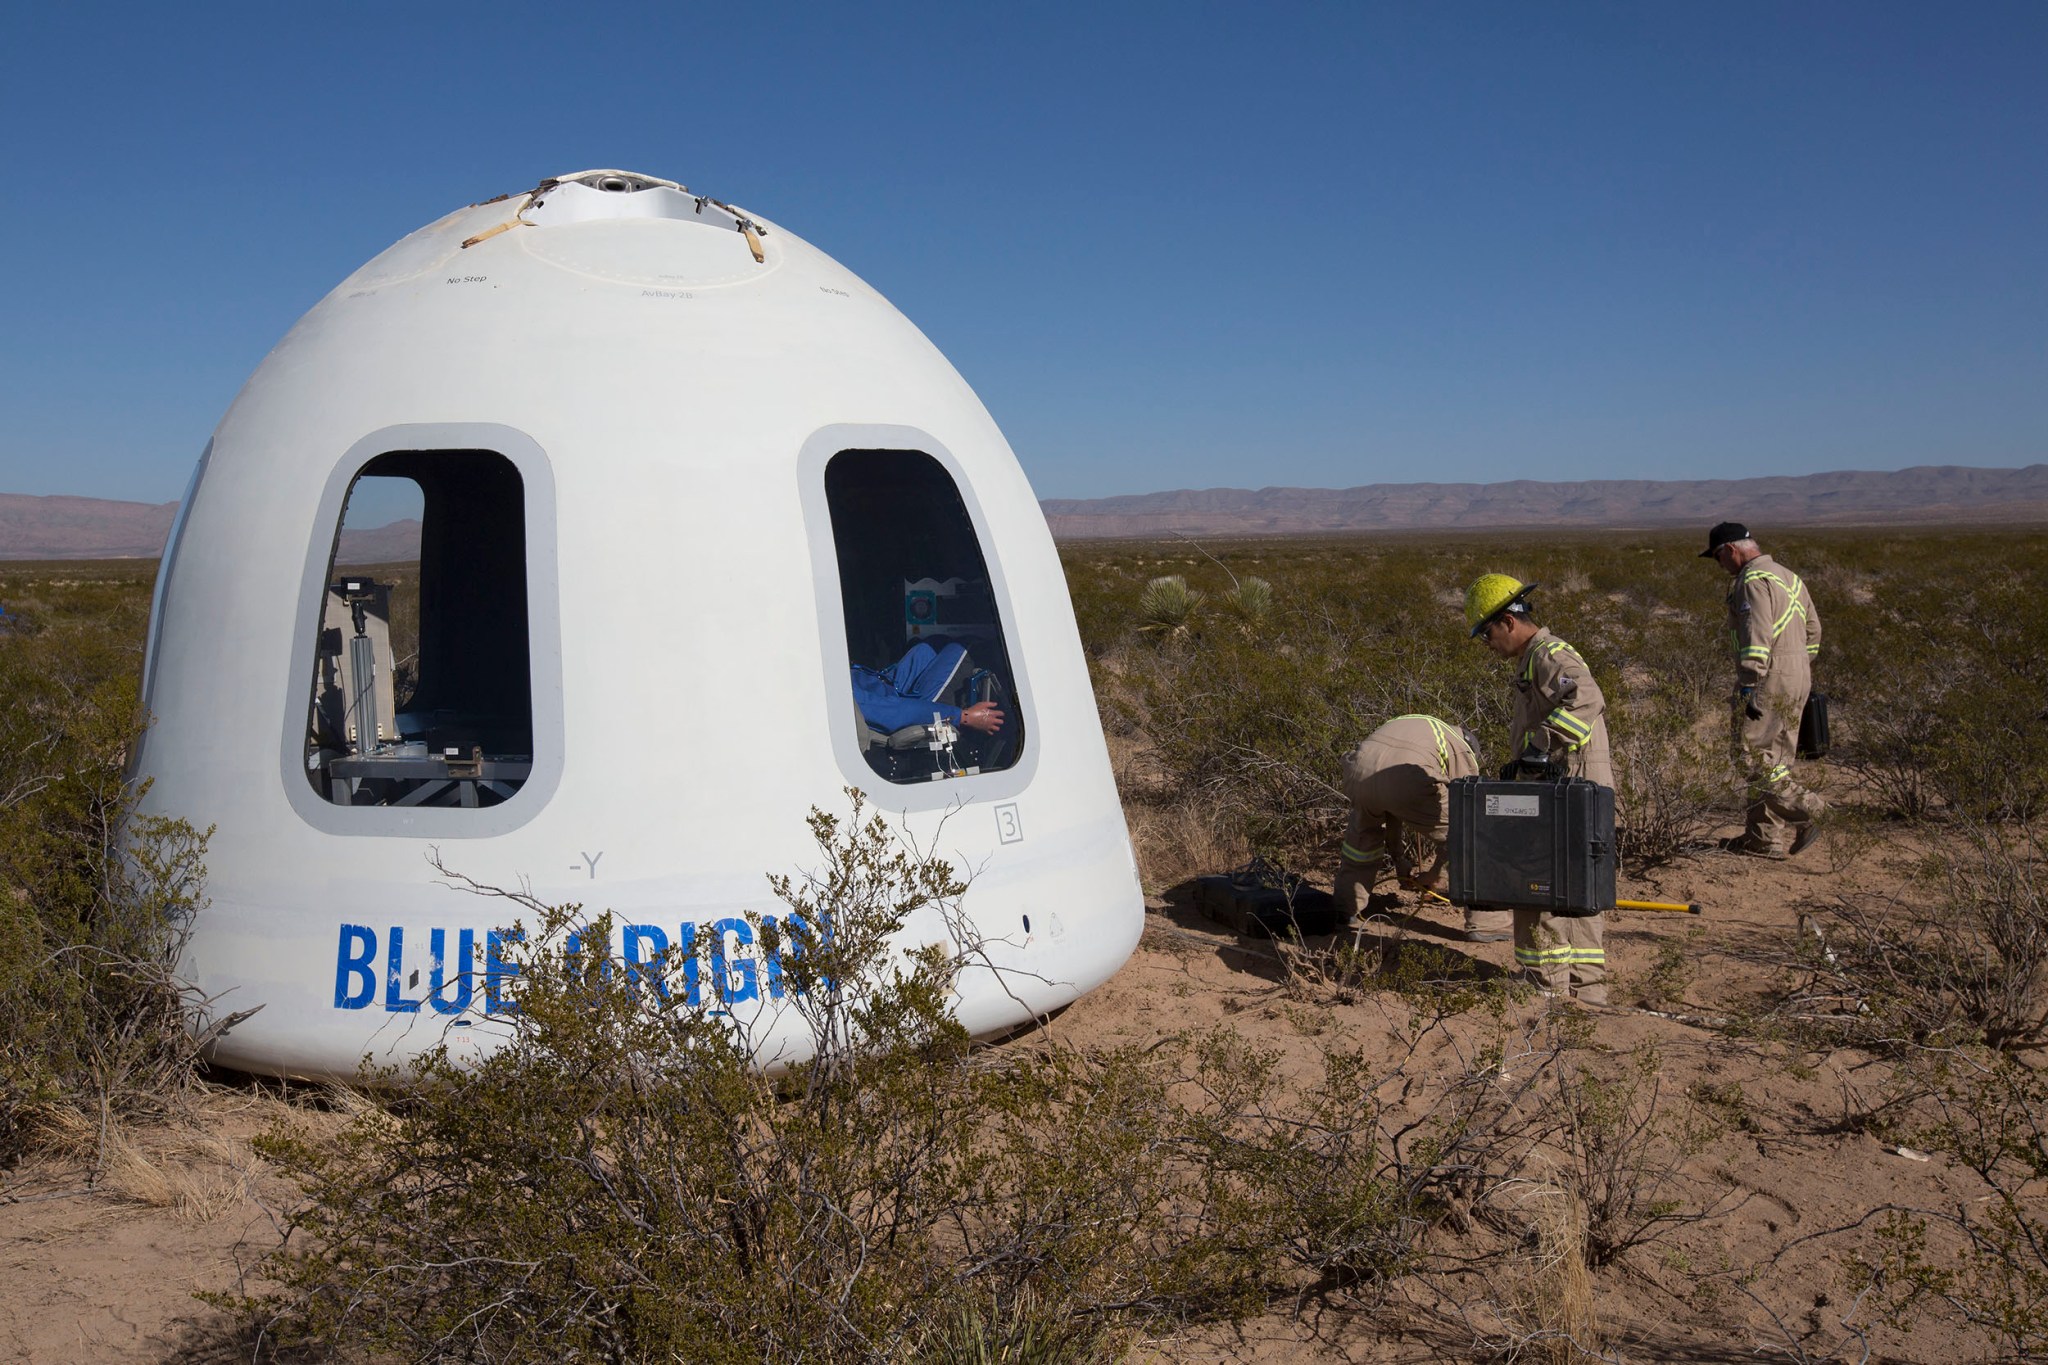 After completing a successful flight, a Blue Origin capsule landed safely in the West Texas desert on Dec. 12.